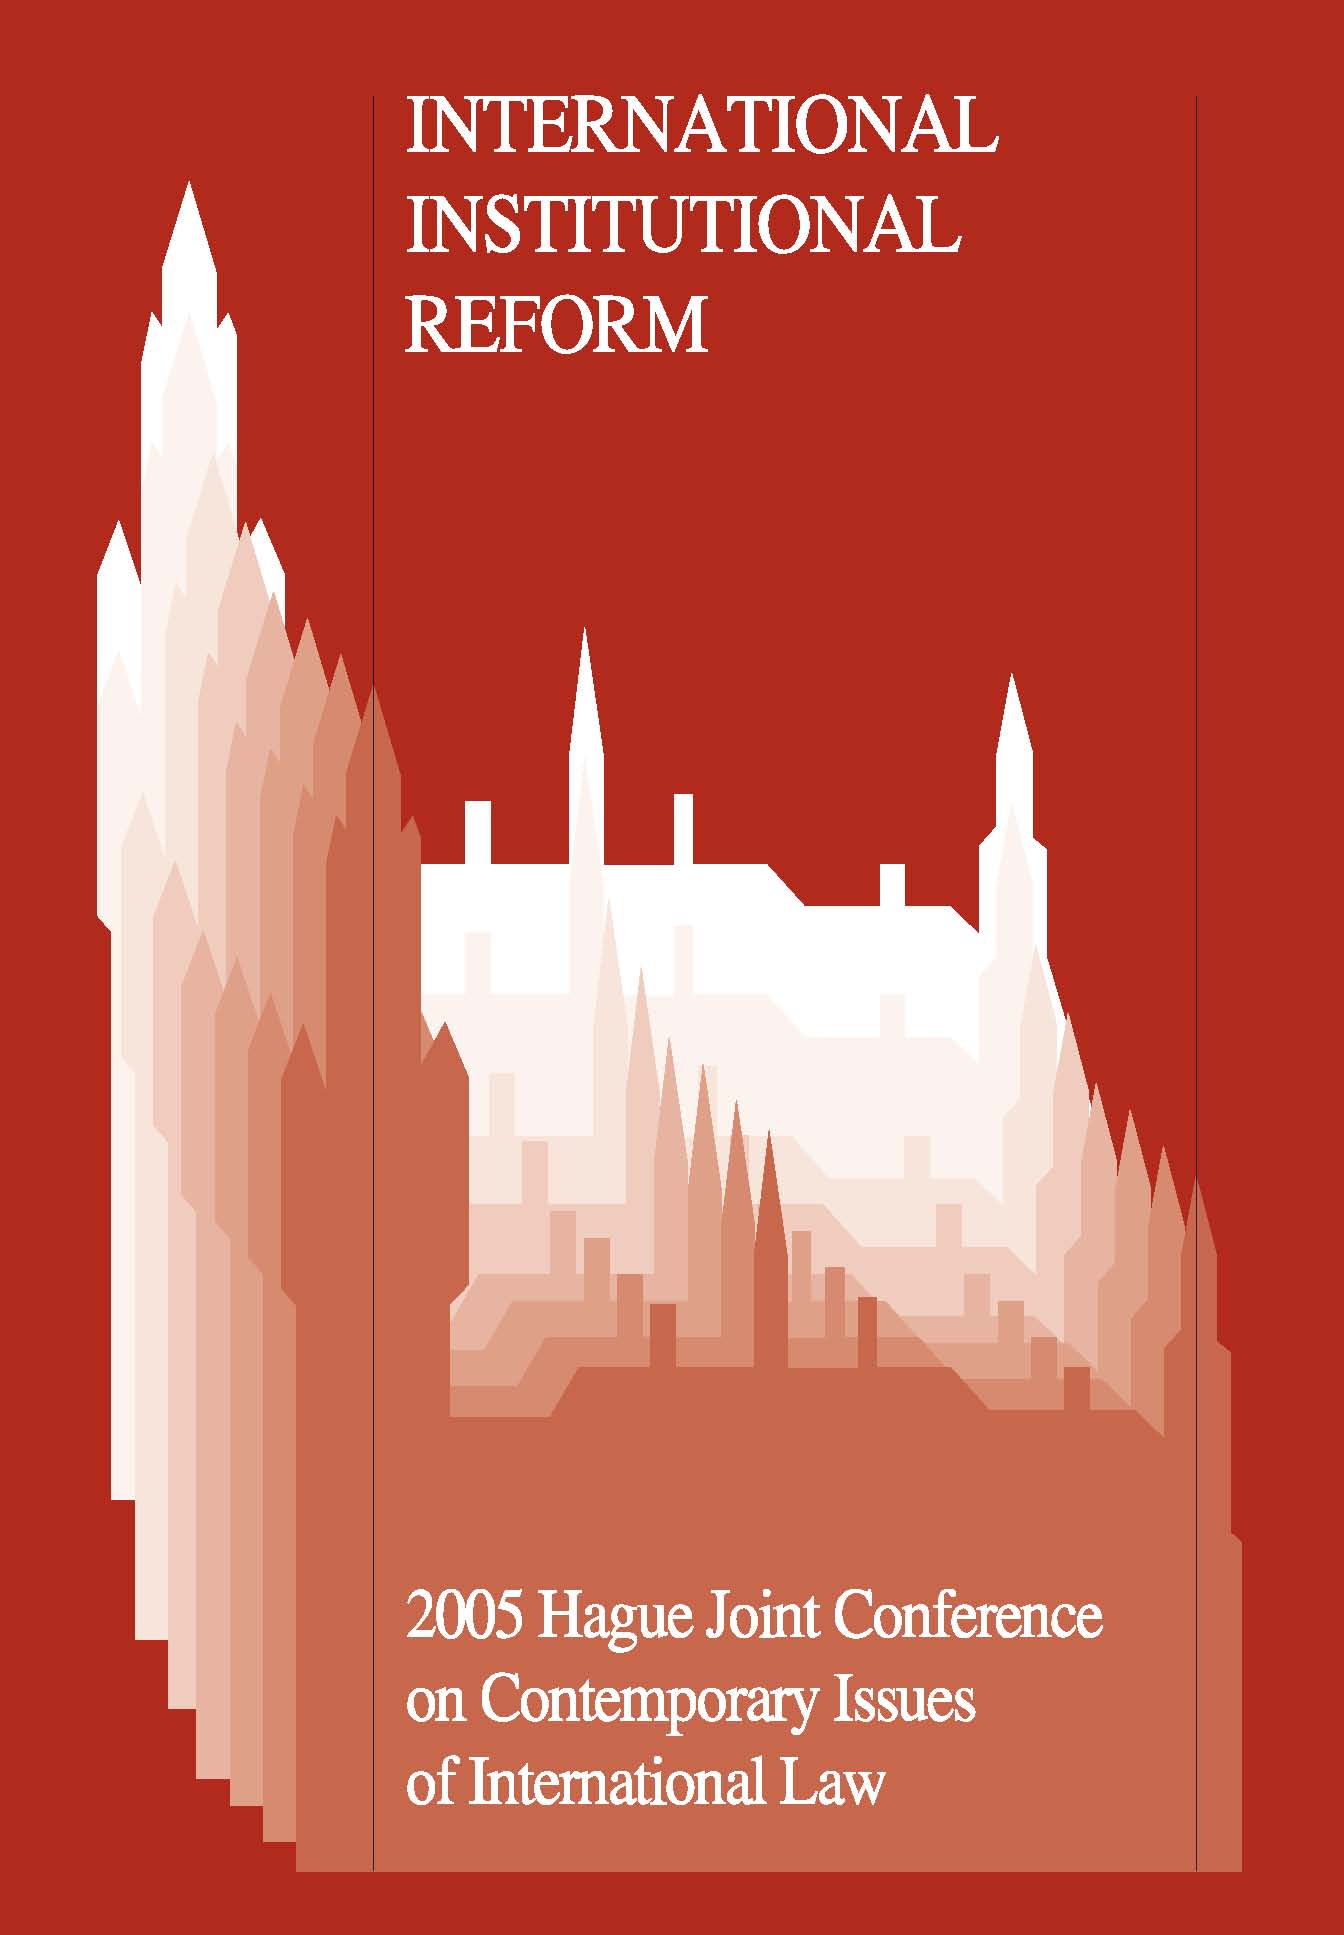 International Institutional Reform - 2005 Hague Joint Conference on Issues of International Law